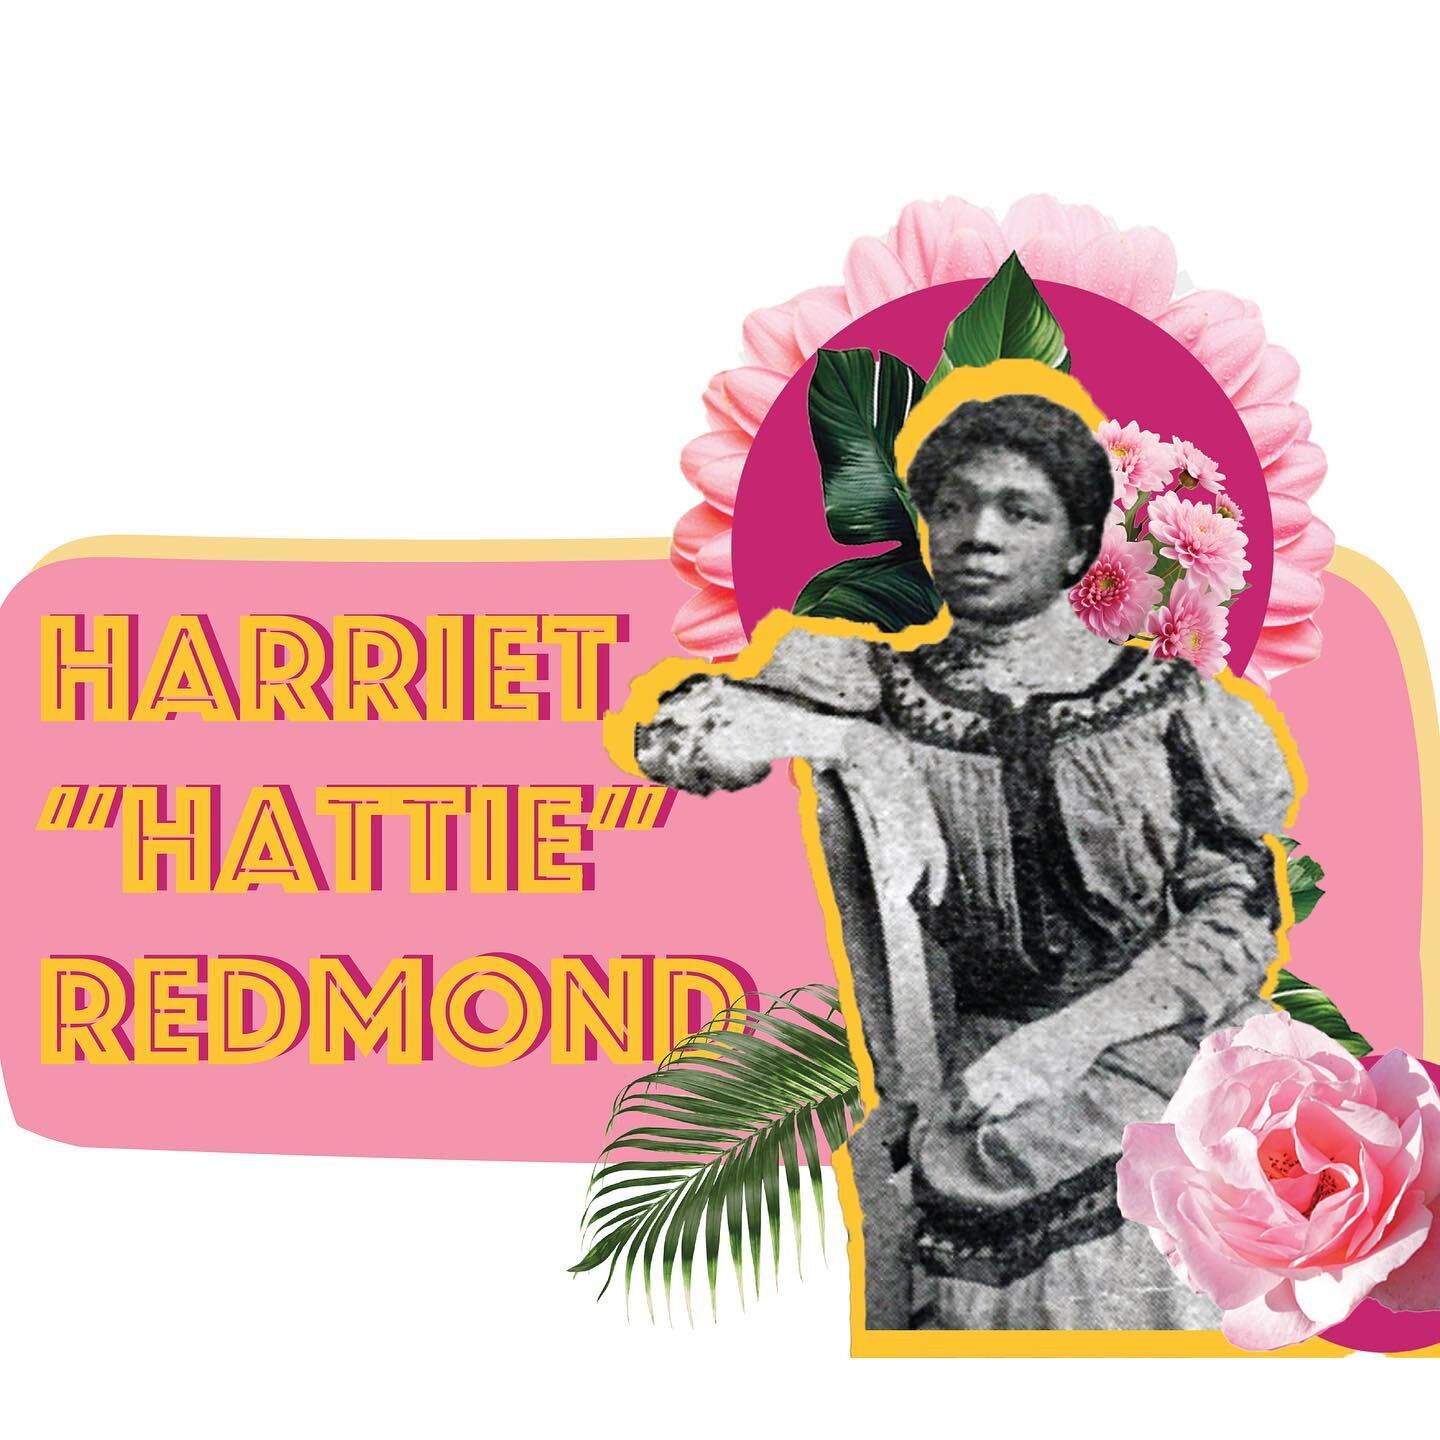 Harriet &ldquo;Hattie&rdquo; Redmond, a groundbreaking suffragist and civil rights champion, fought tirelessly for women&rsquo;s right to vote here in Oregon. 

Her legacy of activism through community engagement and connection inspires us to continu